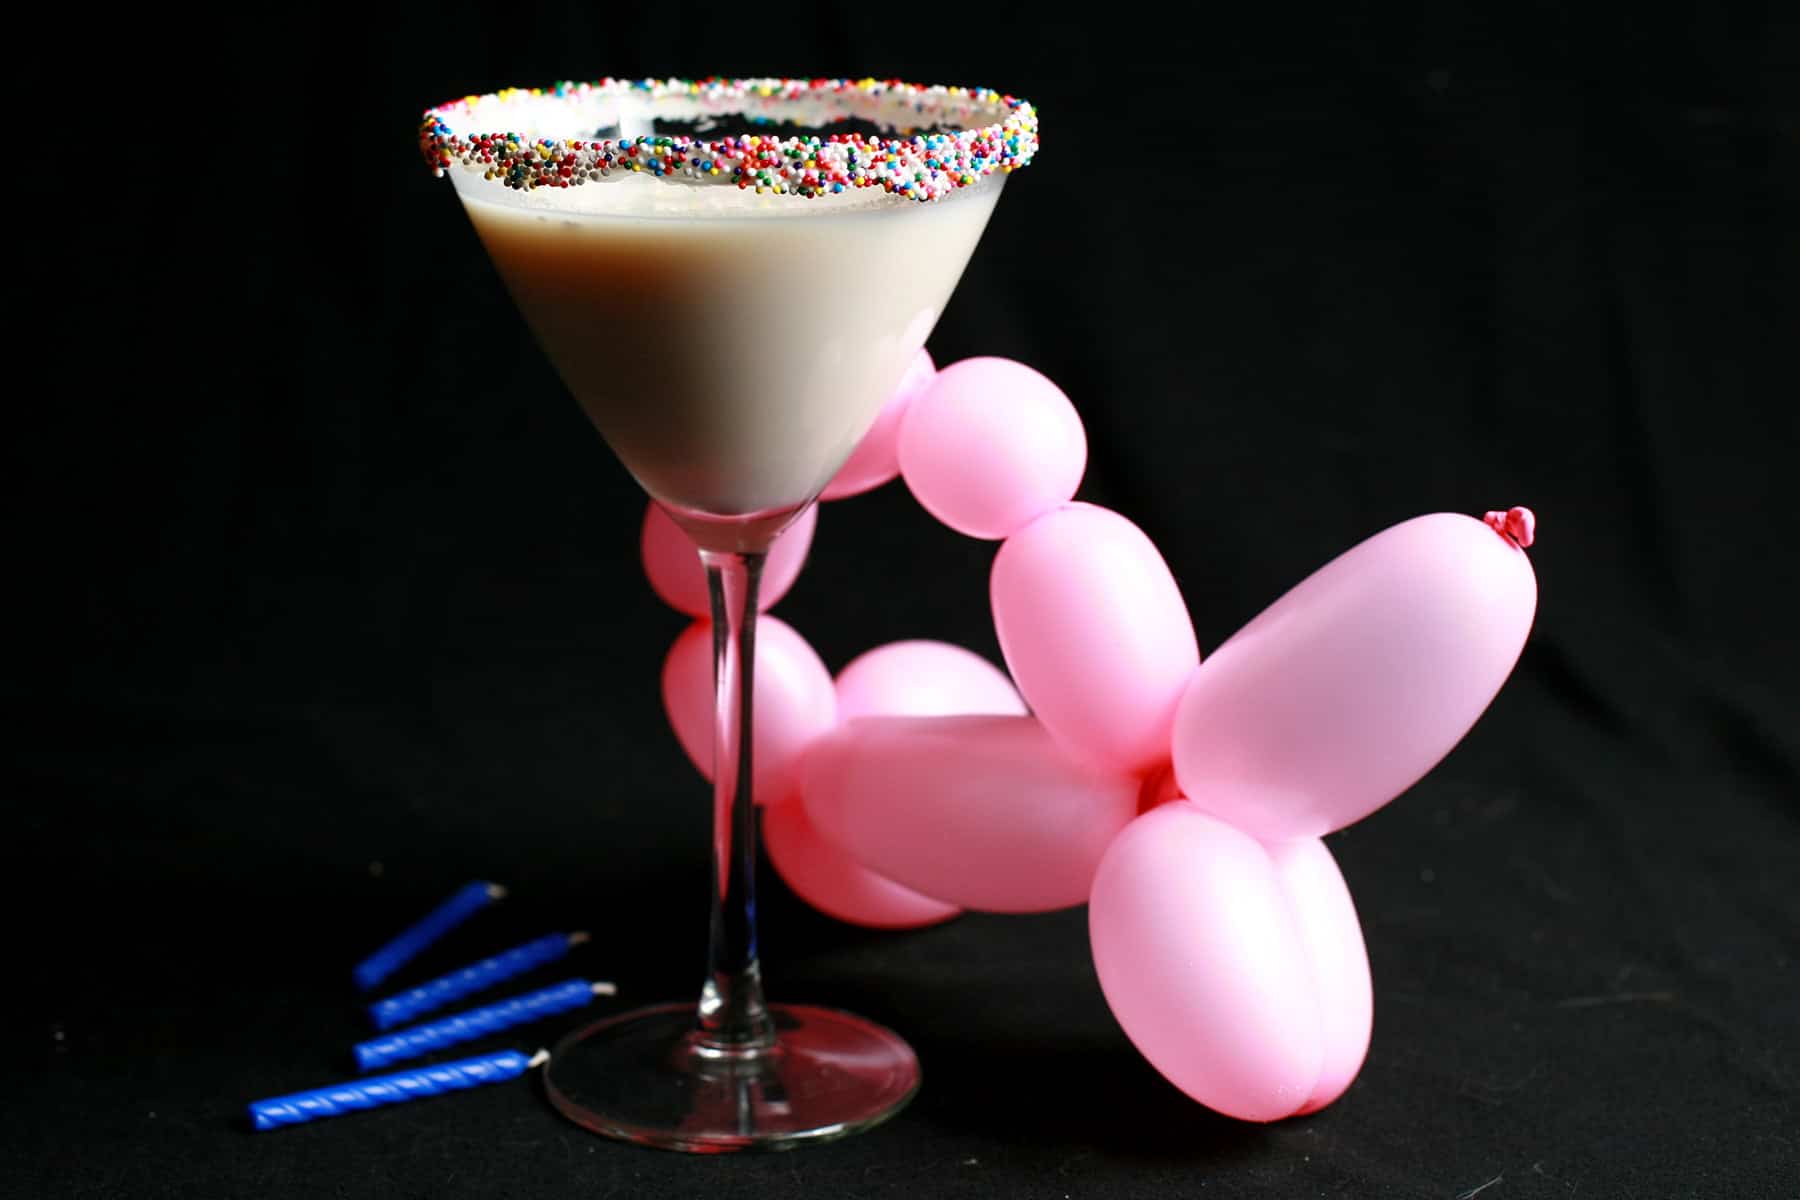 A close up view of a birthday cake martini - a creamy white drink in a martini glass. The rim is coated with colourful nonpareils.  There is a pink ballon animal and blue birthday candles at the base of the glass.